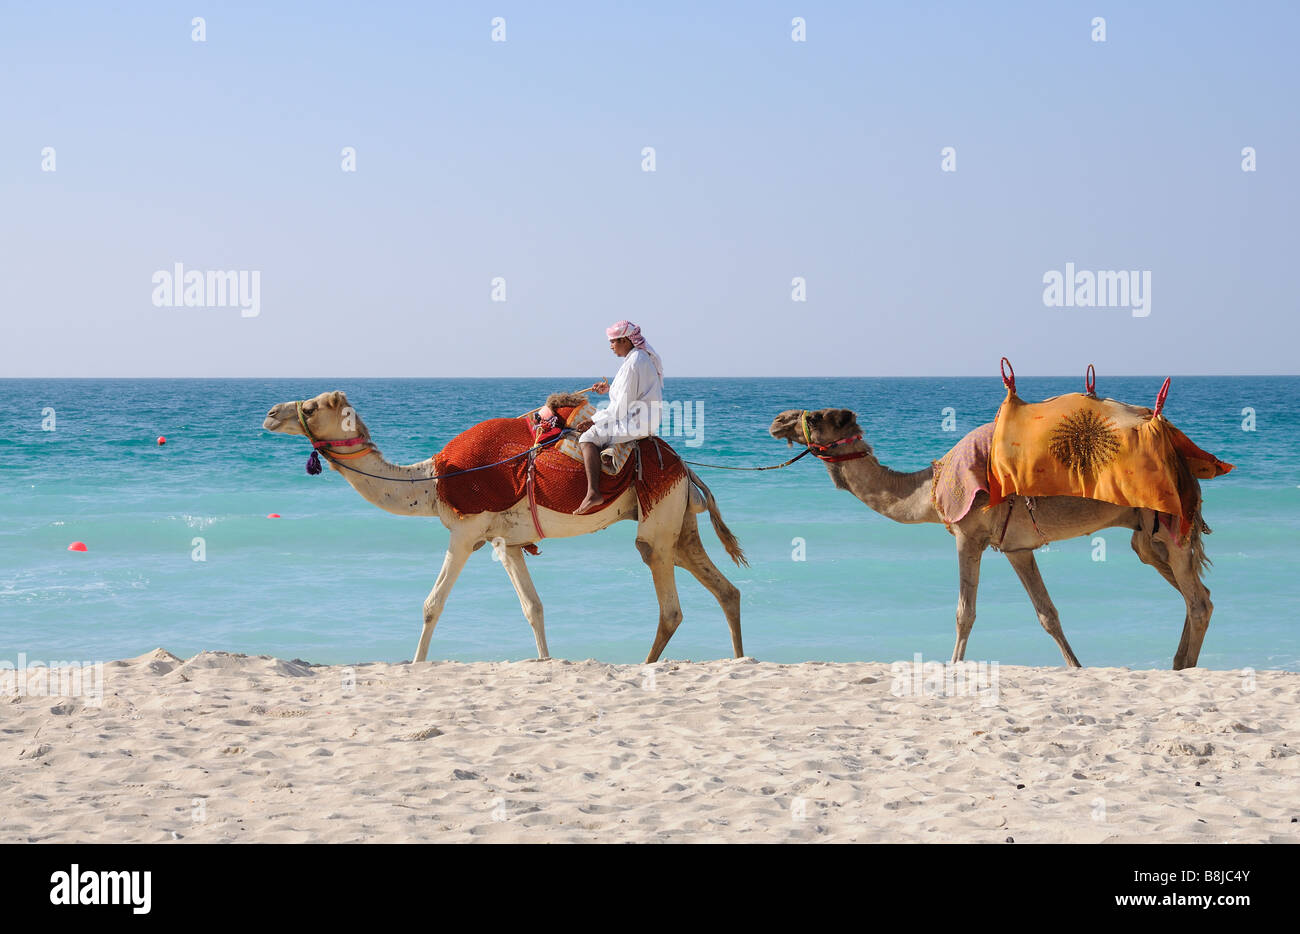 Bedouin with camels on the beach in Dubai Stock Photo